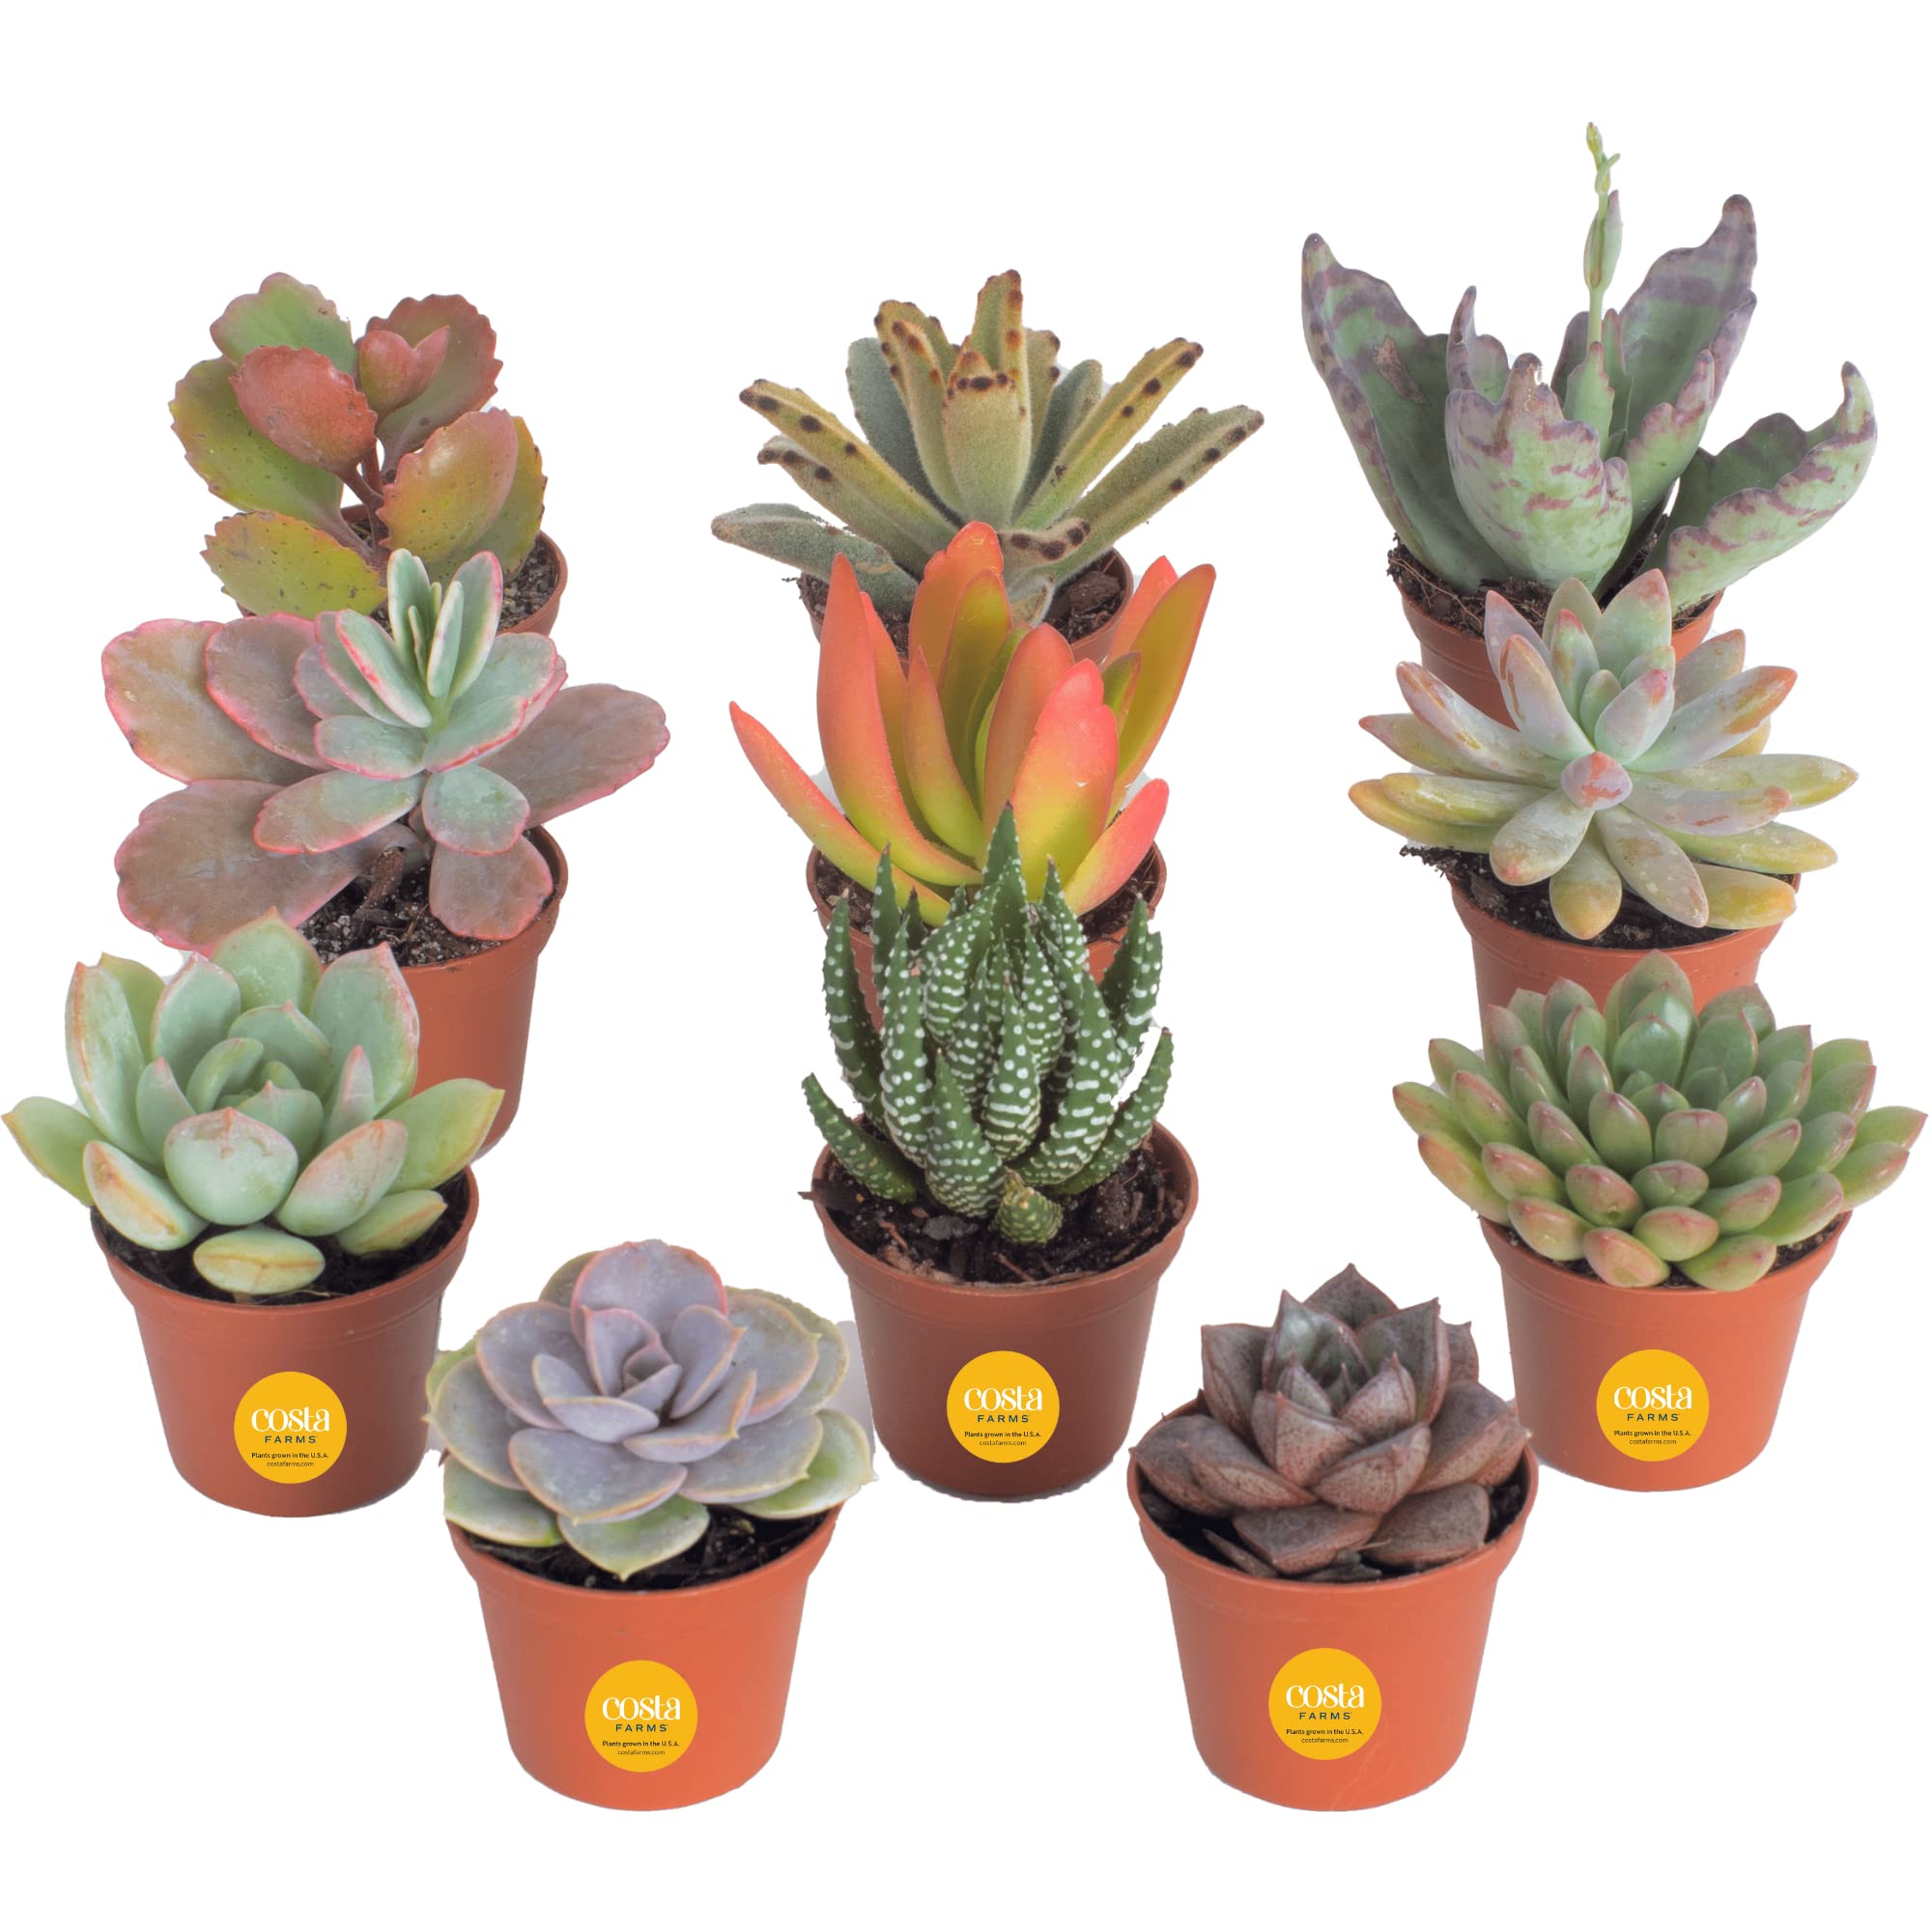 11-Pack 2" Costa Farms Assorted Live Mini Succulent Plants $19.98 + Free Shipping w/ Prime